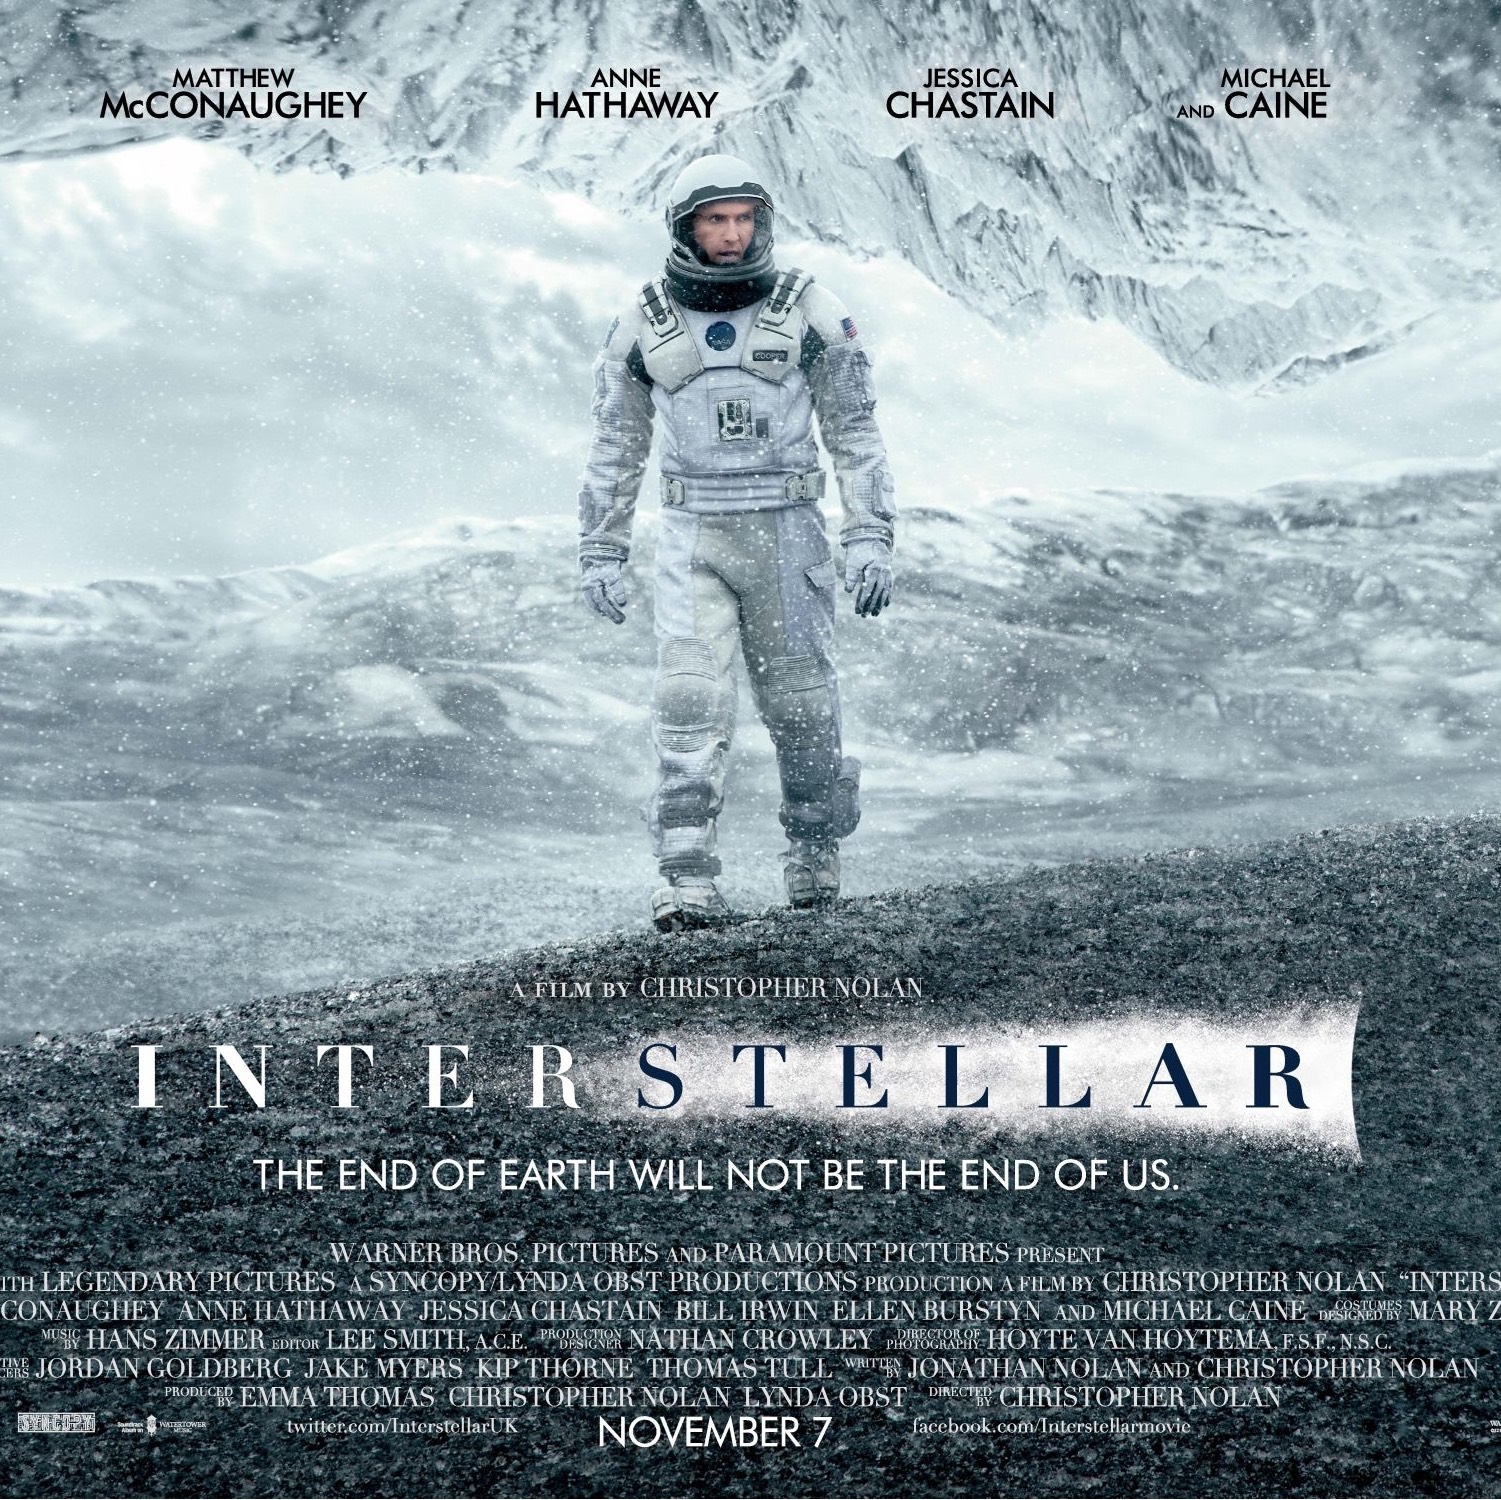 Interstellar - Ghosts, Faith, and Your Brain Before Death